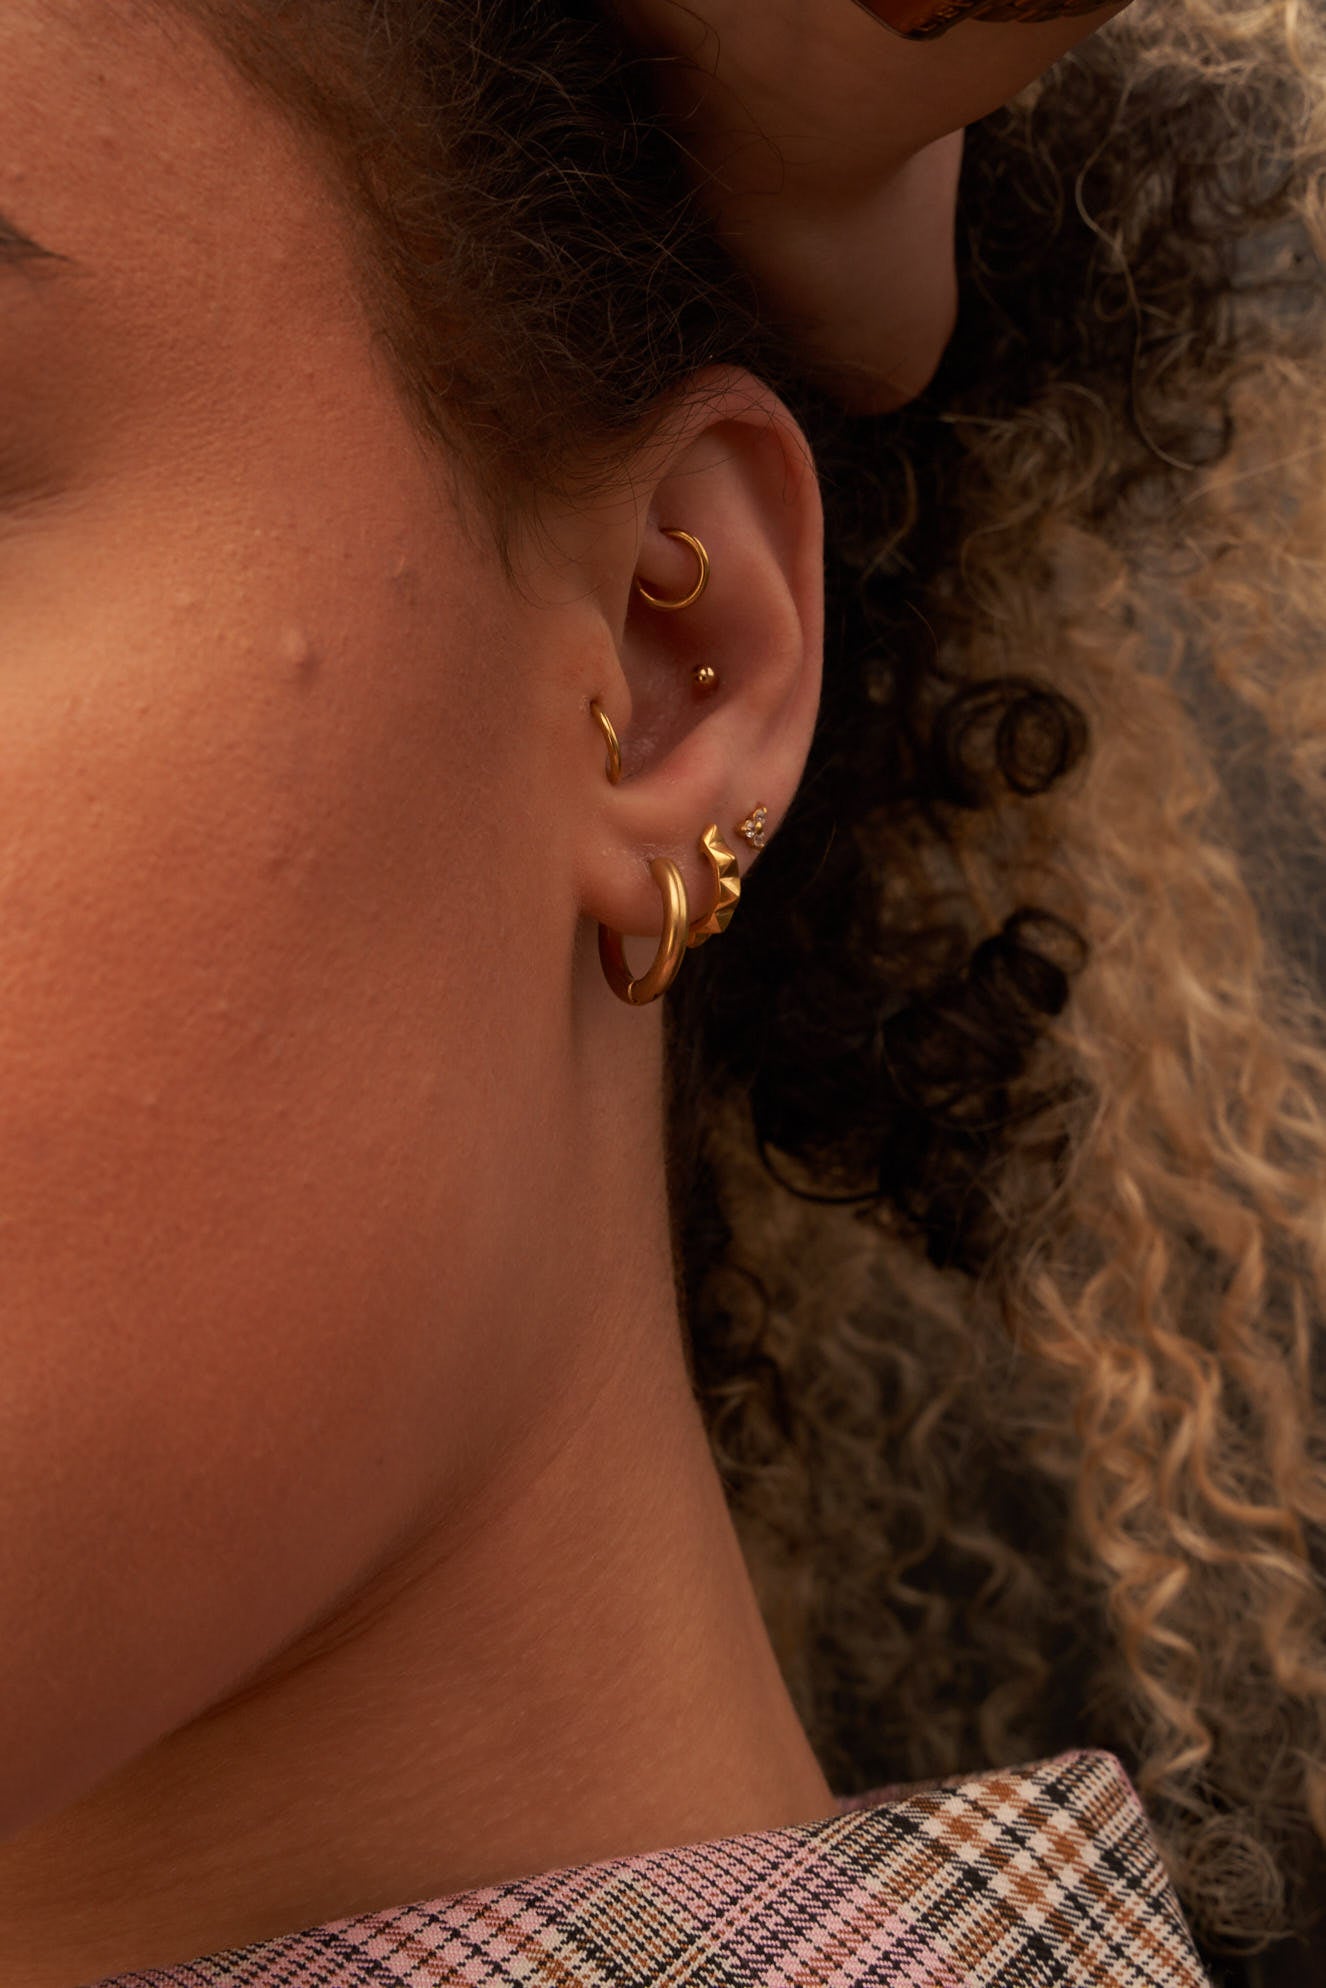 Everything you need to know before getting a piercing